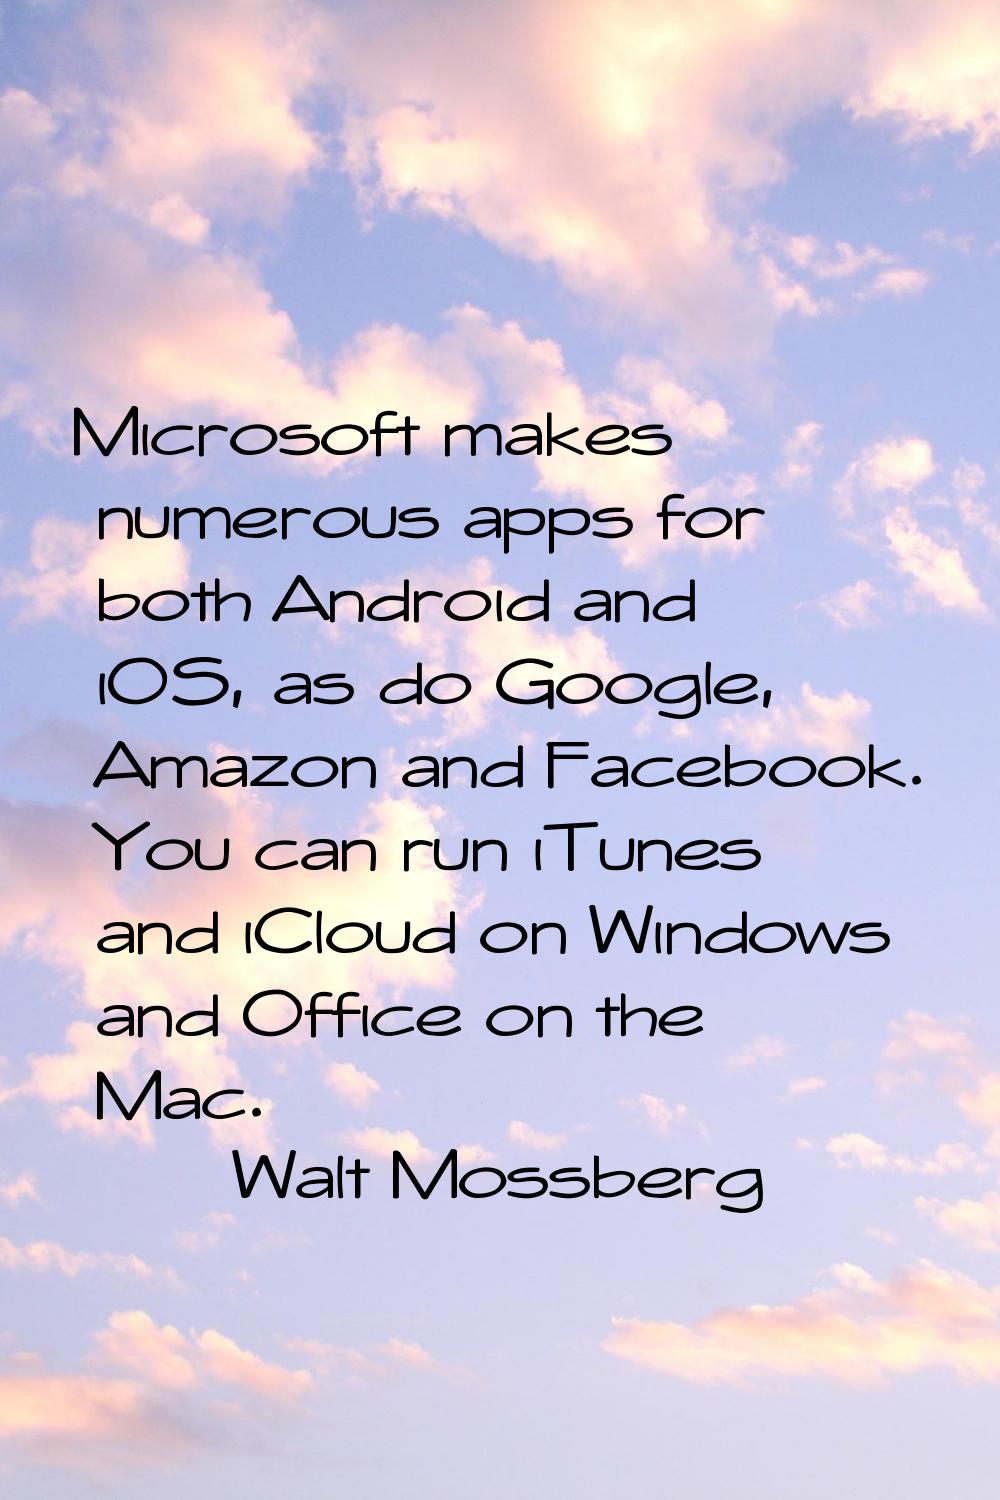 Microsoft makes numerous apps for both Android and iOS, as do Google, Amazon and Facebook. You can 